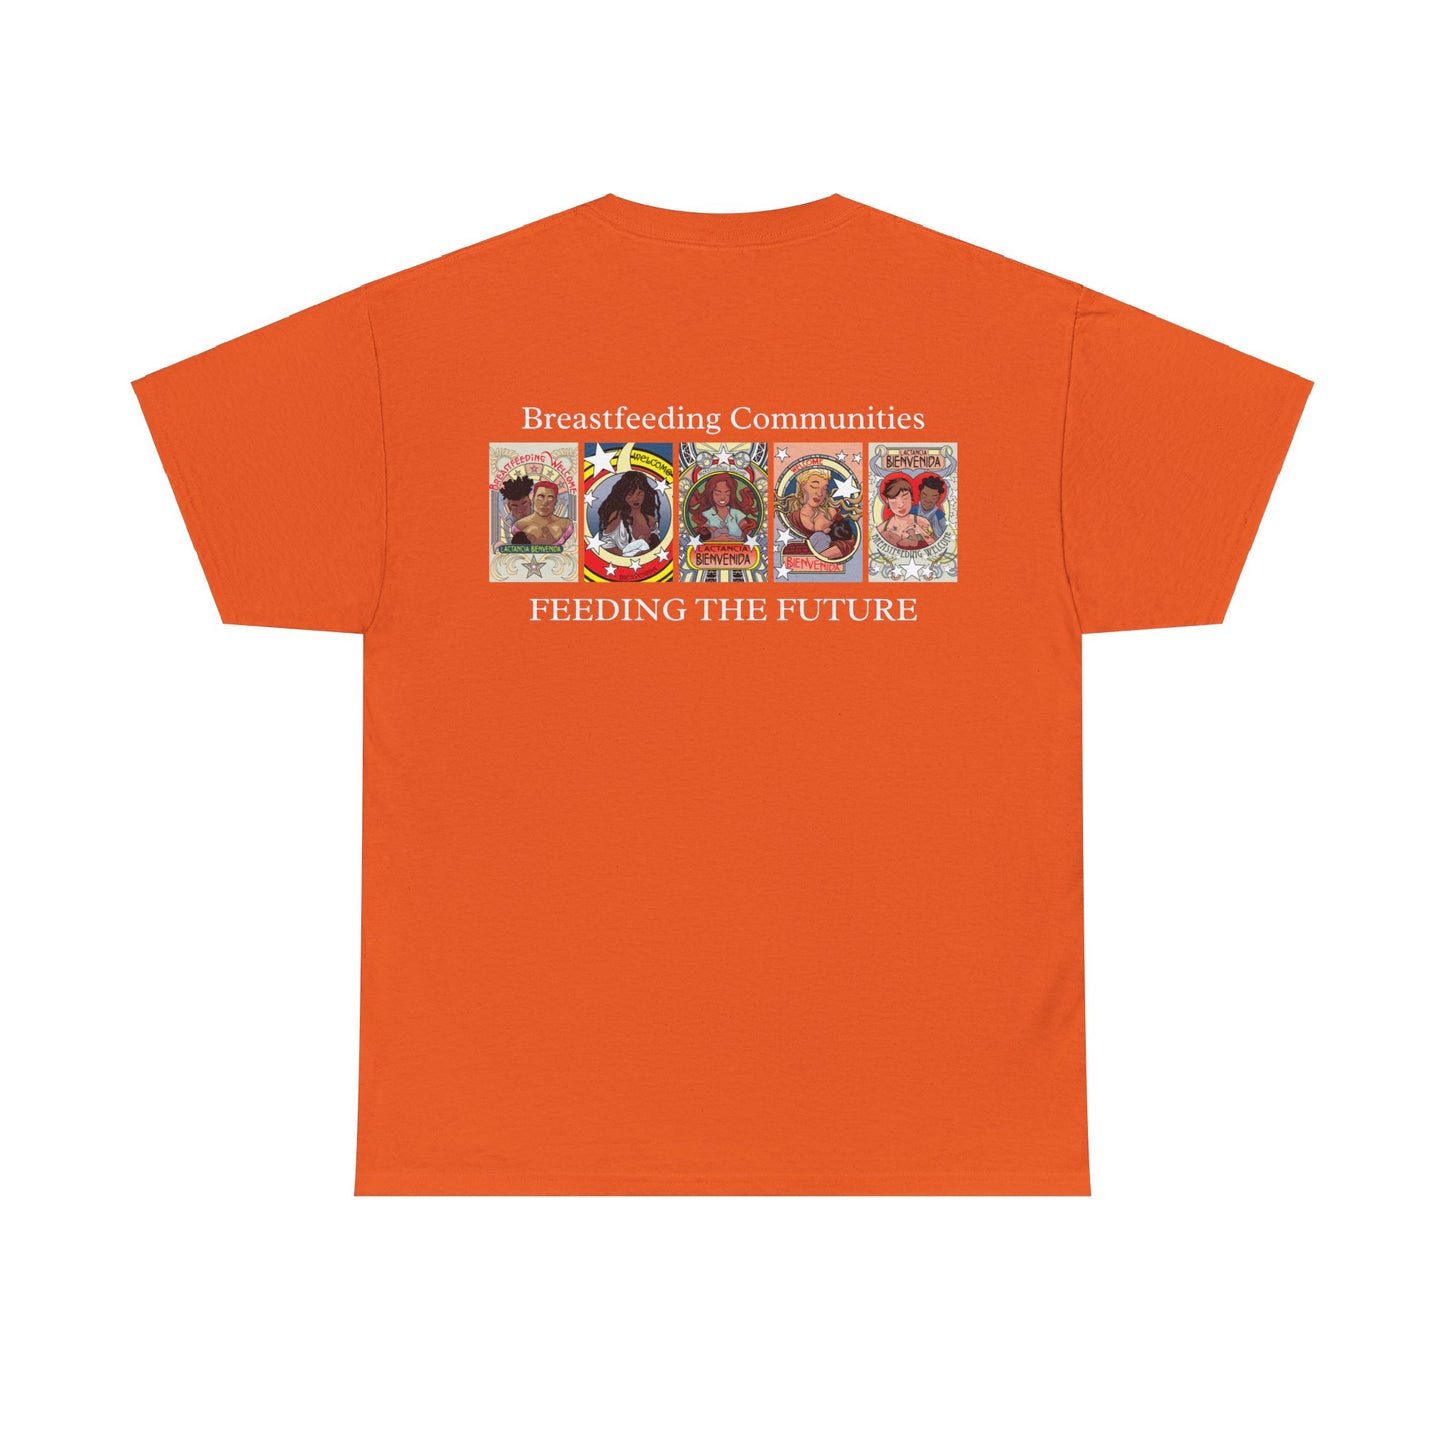 Welcome 3 (front) and Welcome 7(back) - T-shirt (back off shirt varies by color)